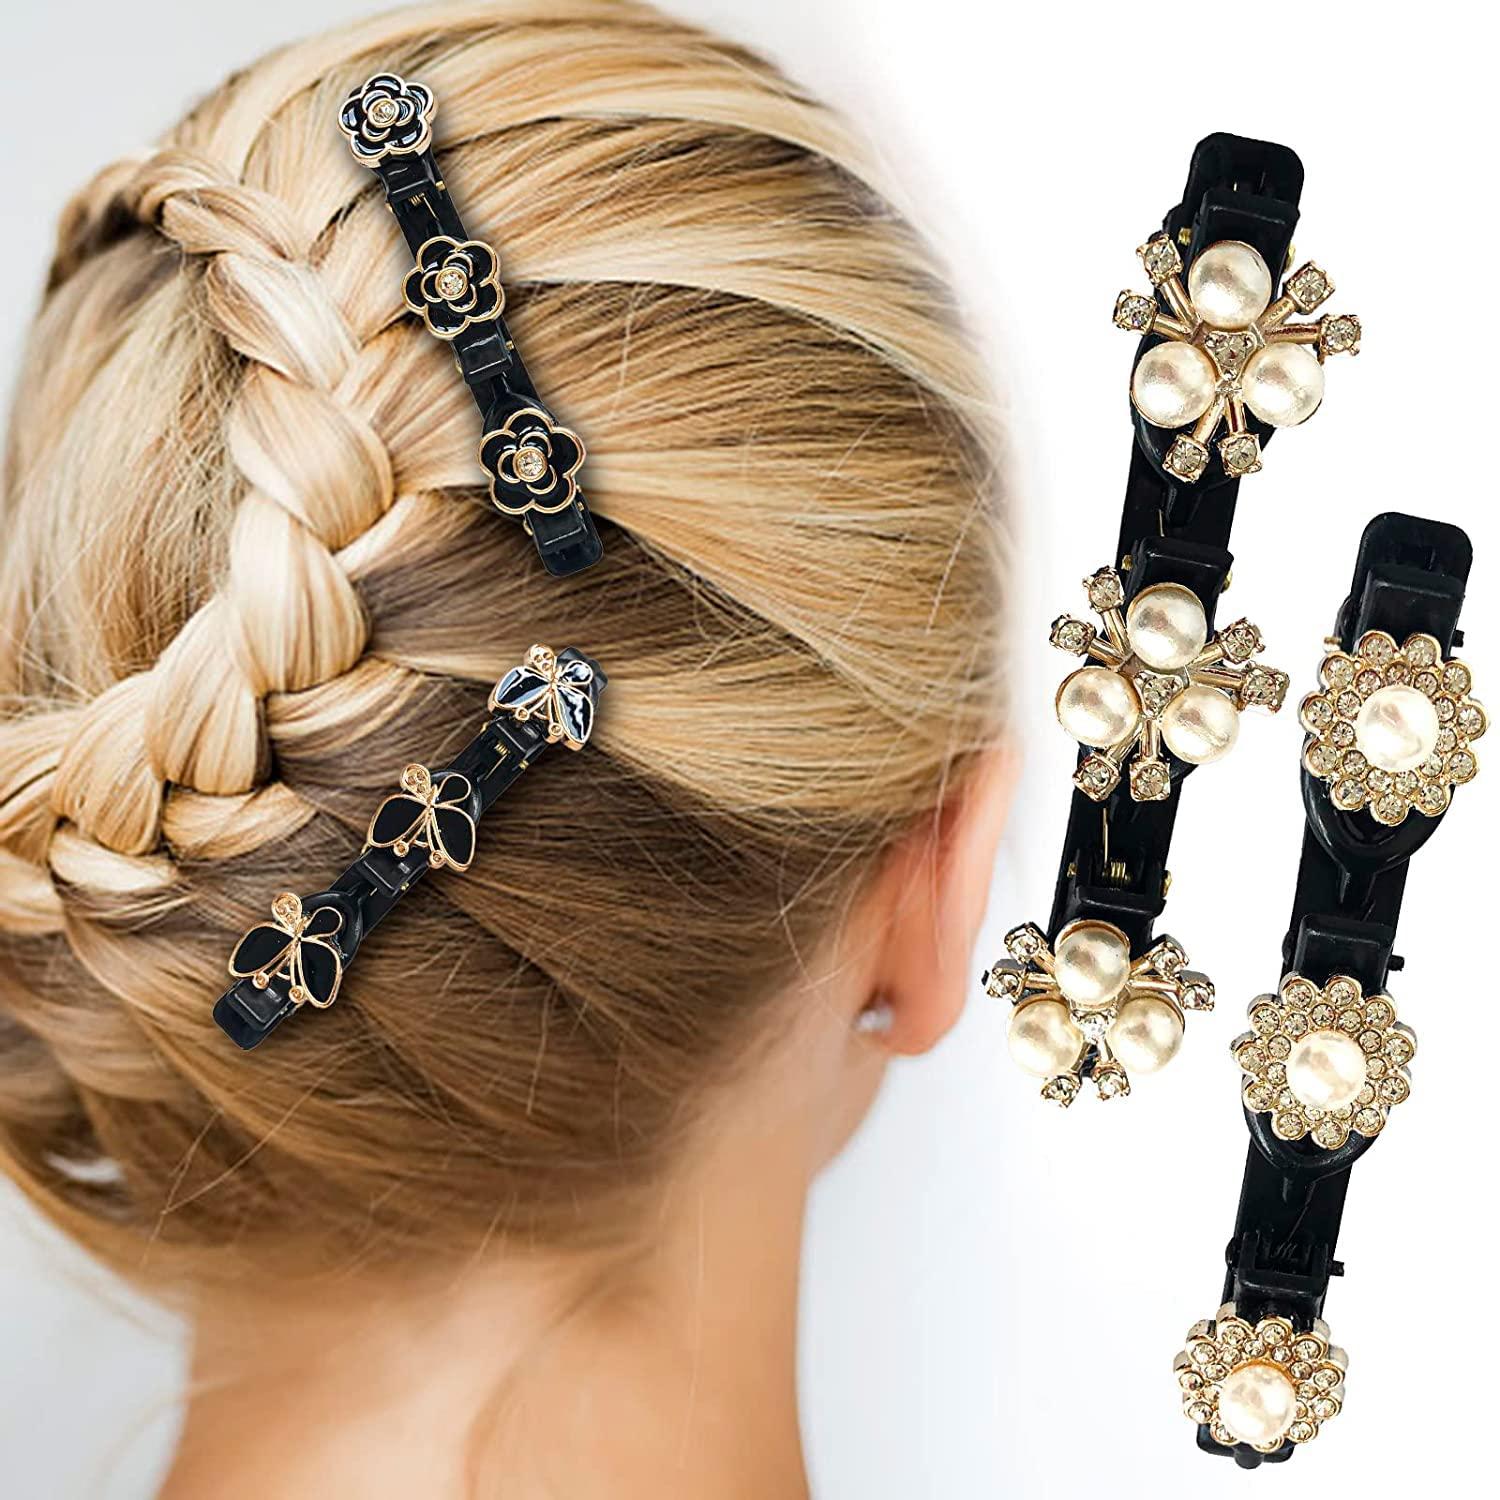 Dropship 8PCS Sparkling Crystal Stone Braided Hair Clips Four-Leaf Clover  Chopped Hairpin Duckbill Clip With 3 Small Clips On Top Hair Accessories  Clips For Women Girls to Sell Online at a Lower